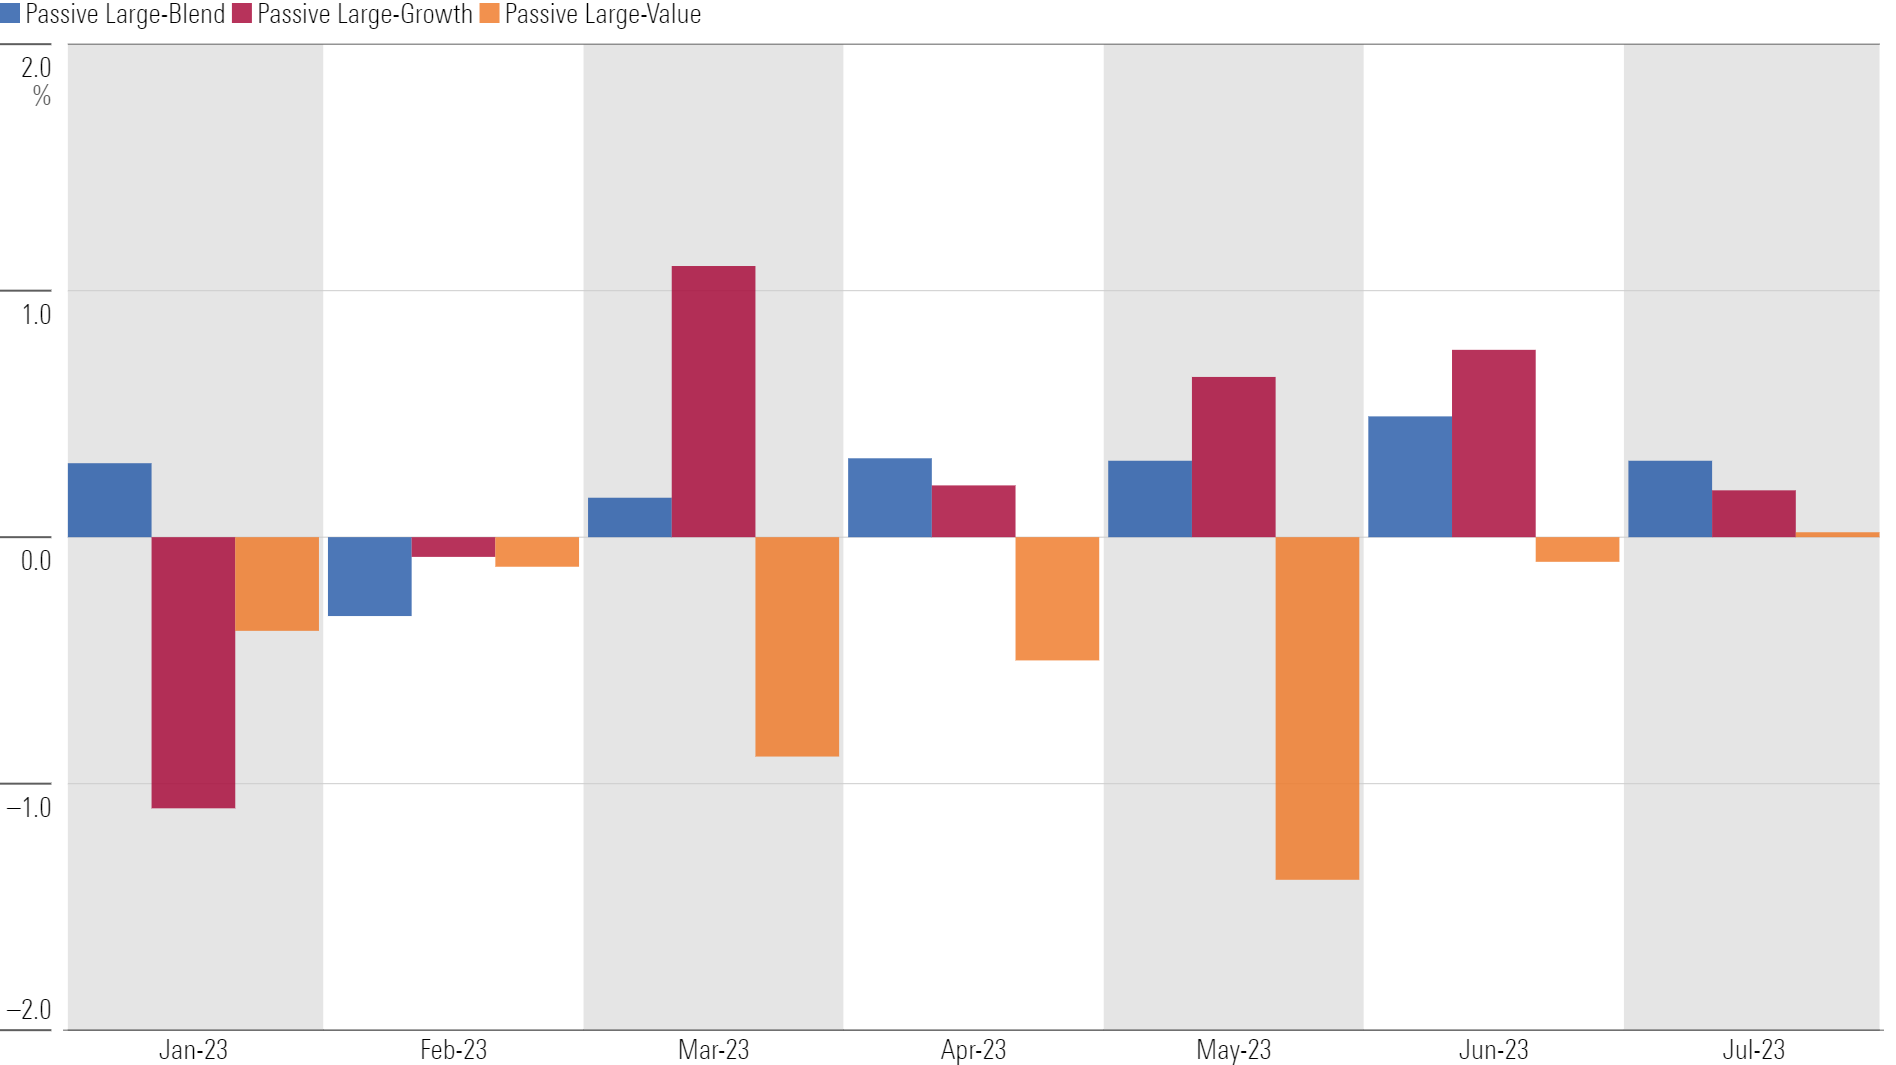 Bar chart of monthly flows for passive blend, growth, and value funds.